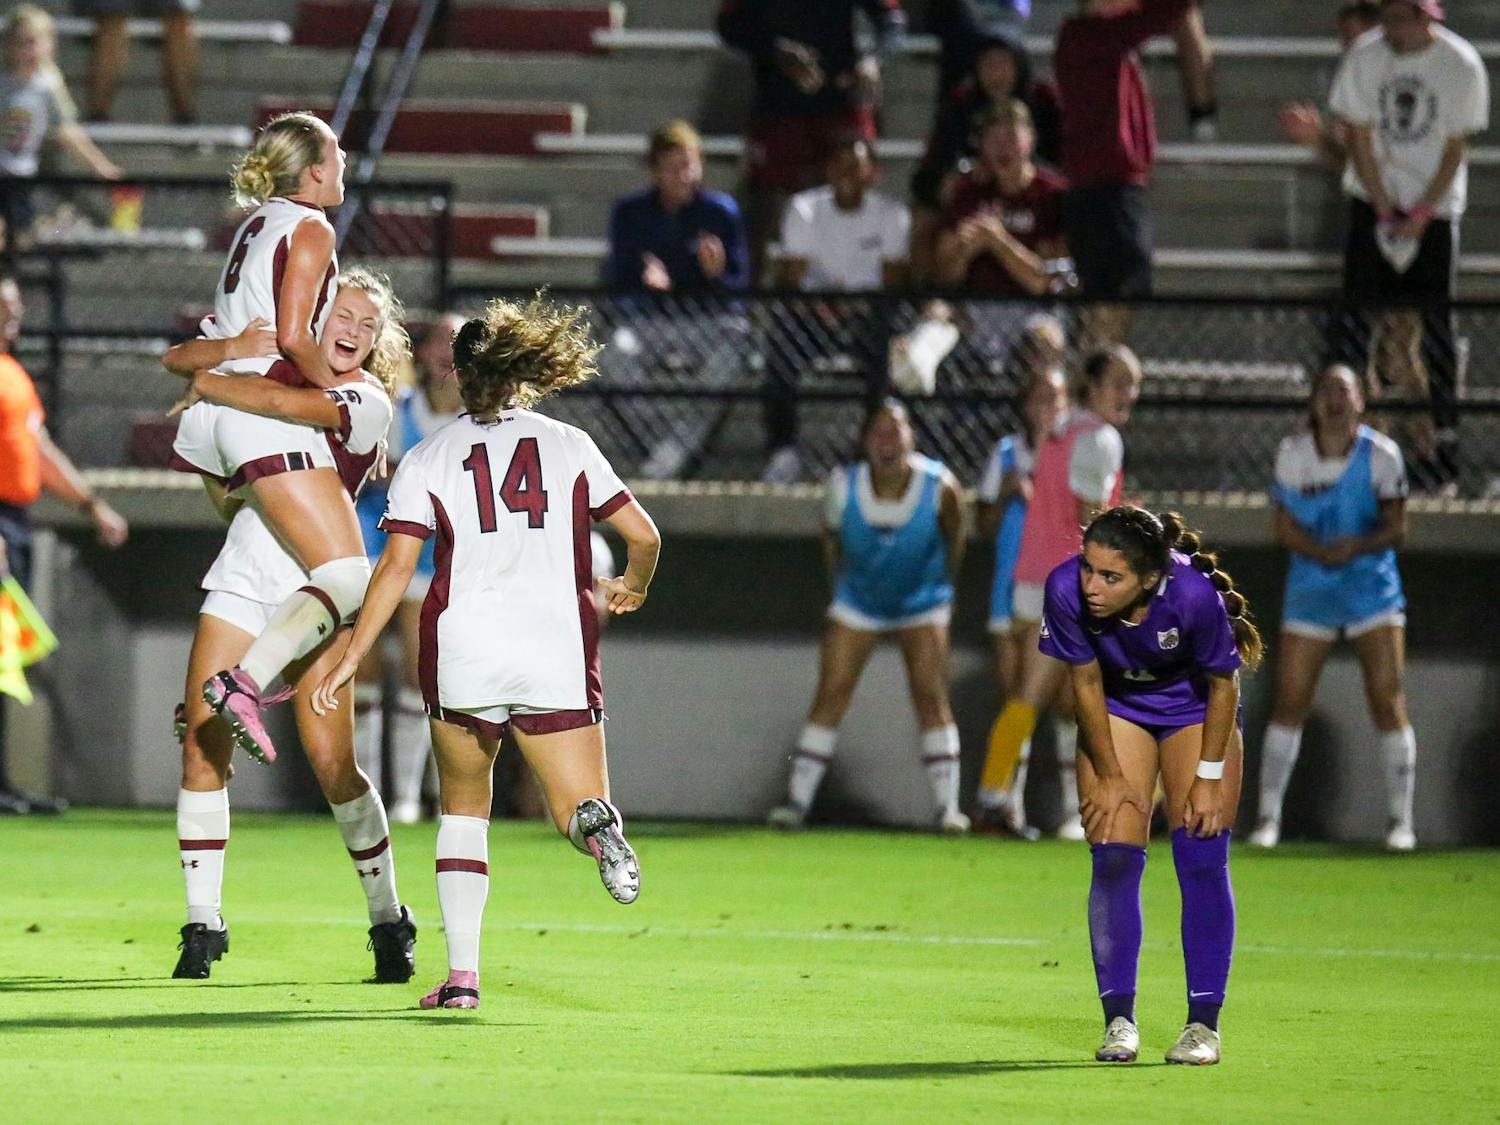 The Gamecock women's soccer team claimed a 1-0 victory over the LSU Tigers at Stone Stadium on Oct. 5, 2023. The match was the team's "Pink Out" game for Breast Cancer Awareness and two survivors were honored, one prior to the start of the match and one during halftime. The team is now 9-1-3 overall for the season.